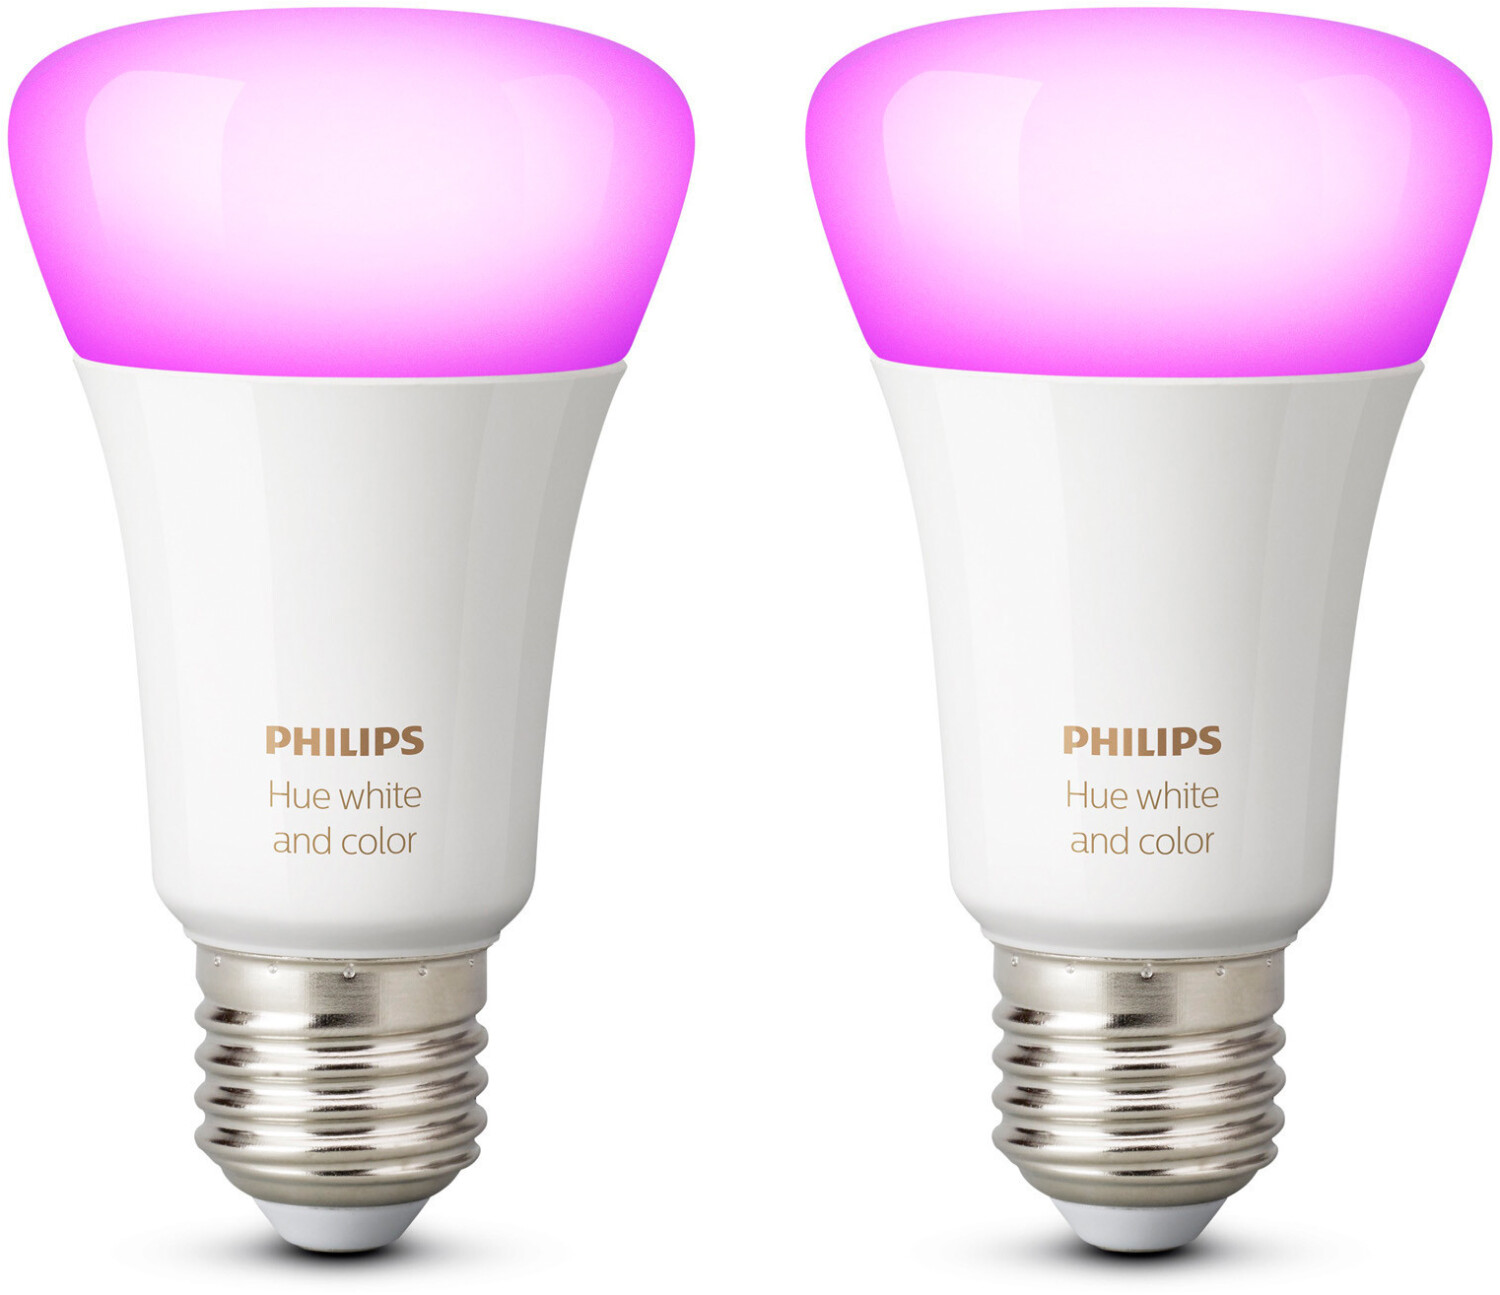 Buy Philips Hue White and Color Ambiance Bluetooth 2 x E27 (929002216803)  from £49.99 (Today) – Best Deals on